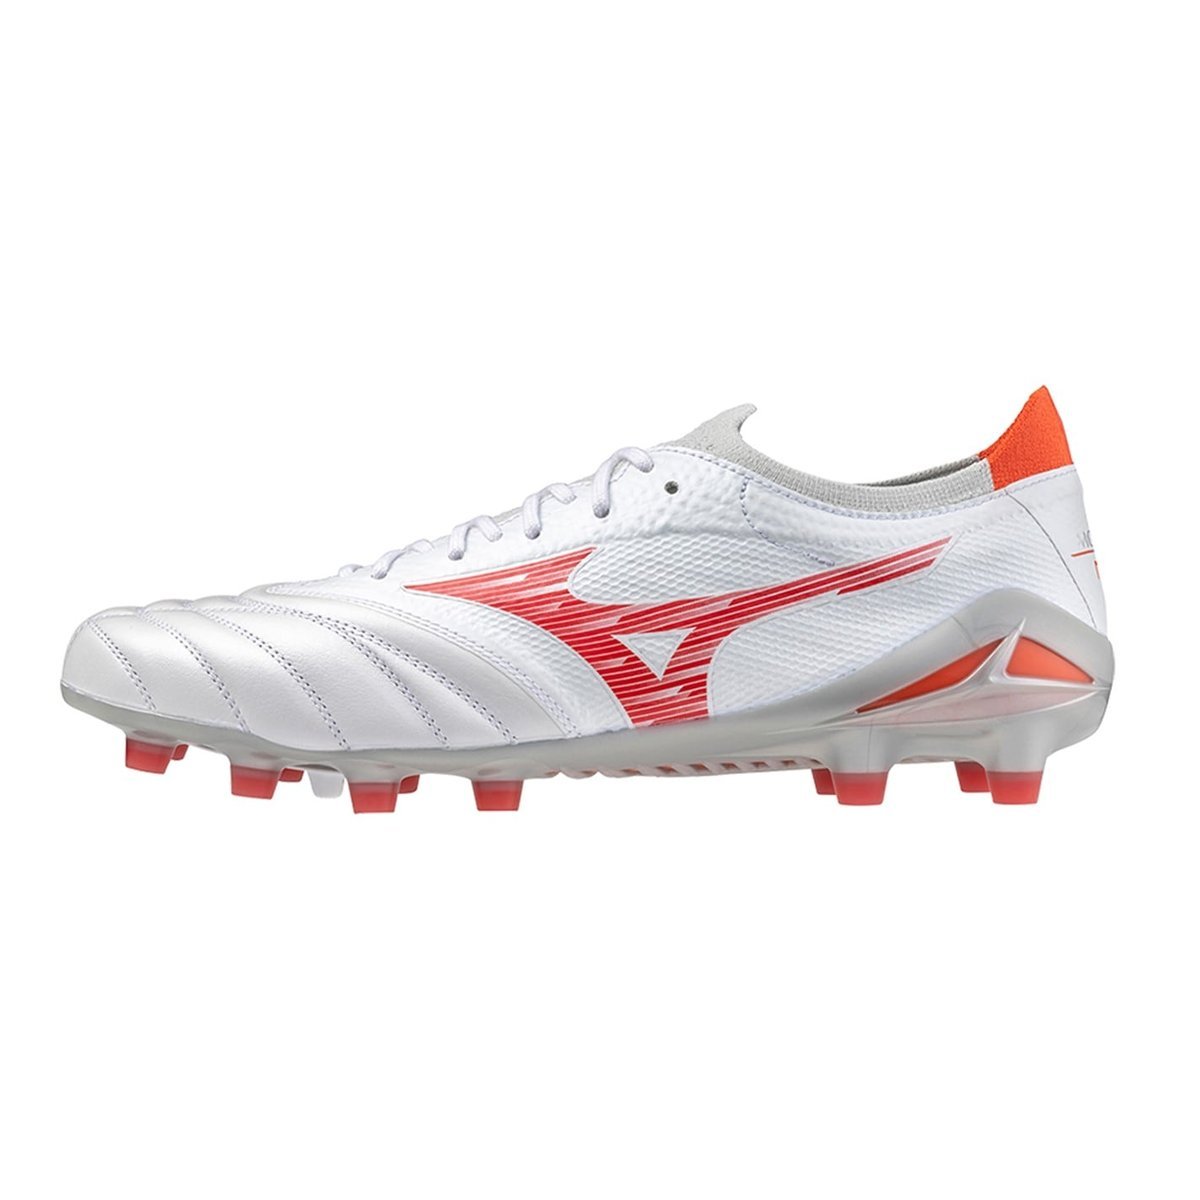 Mizuno Rugby Boots - Lovell Rugby